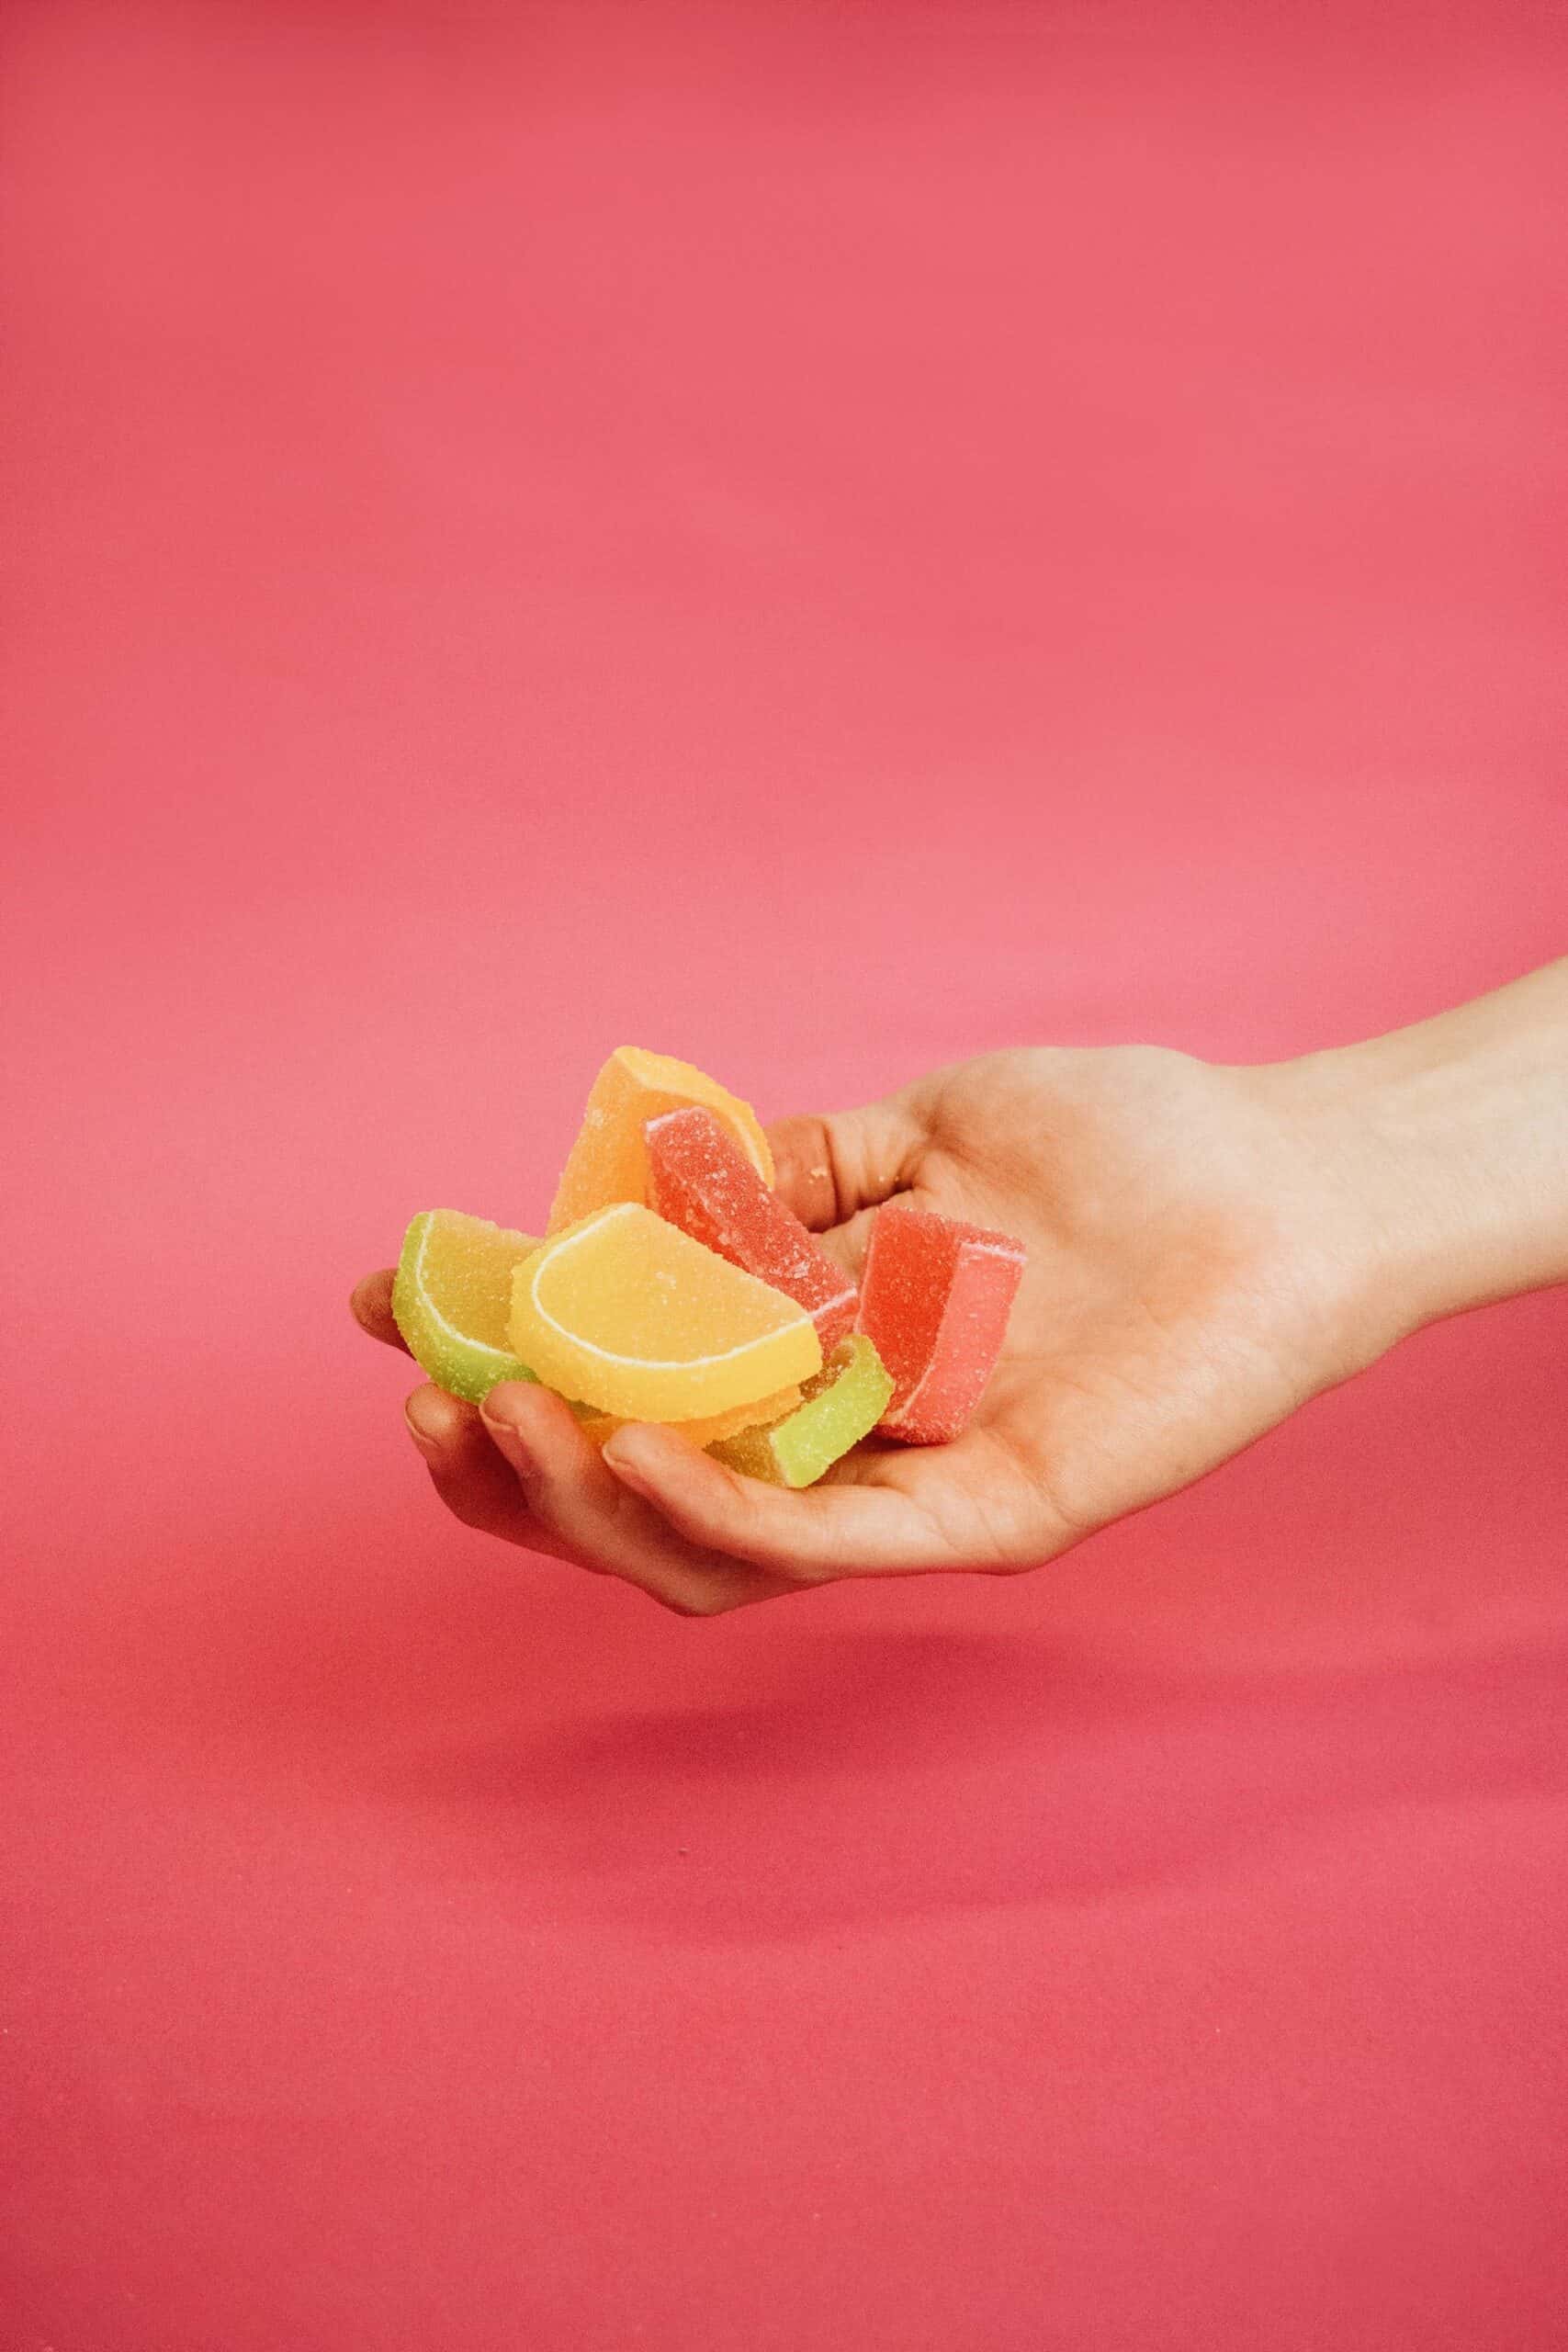 The Pros and Cons of Combining CBD Gummies and Alcohol